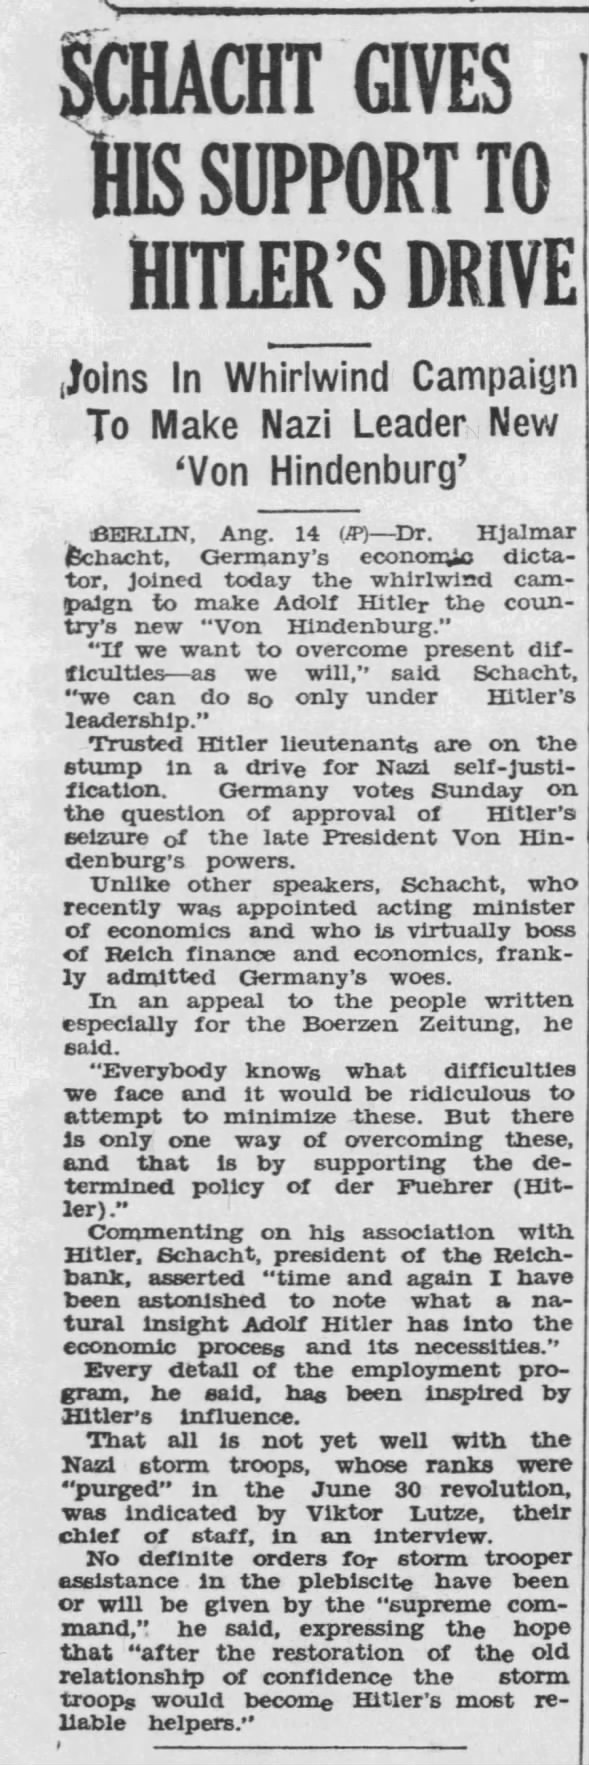 Schacht Gives His Support To Hitler's Drive